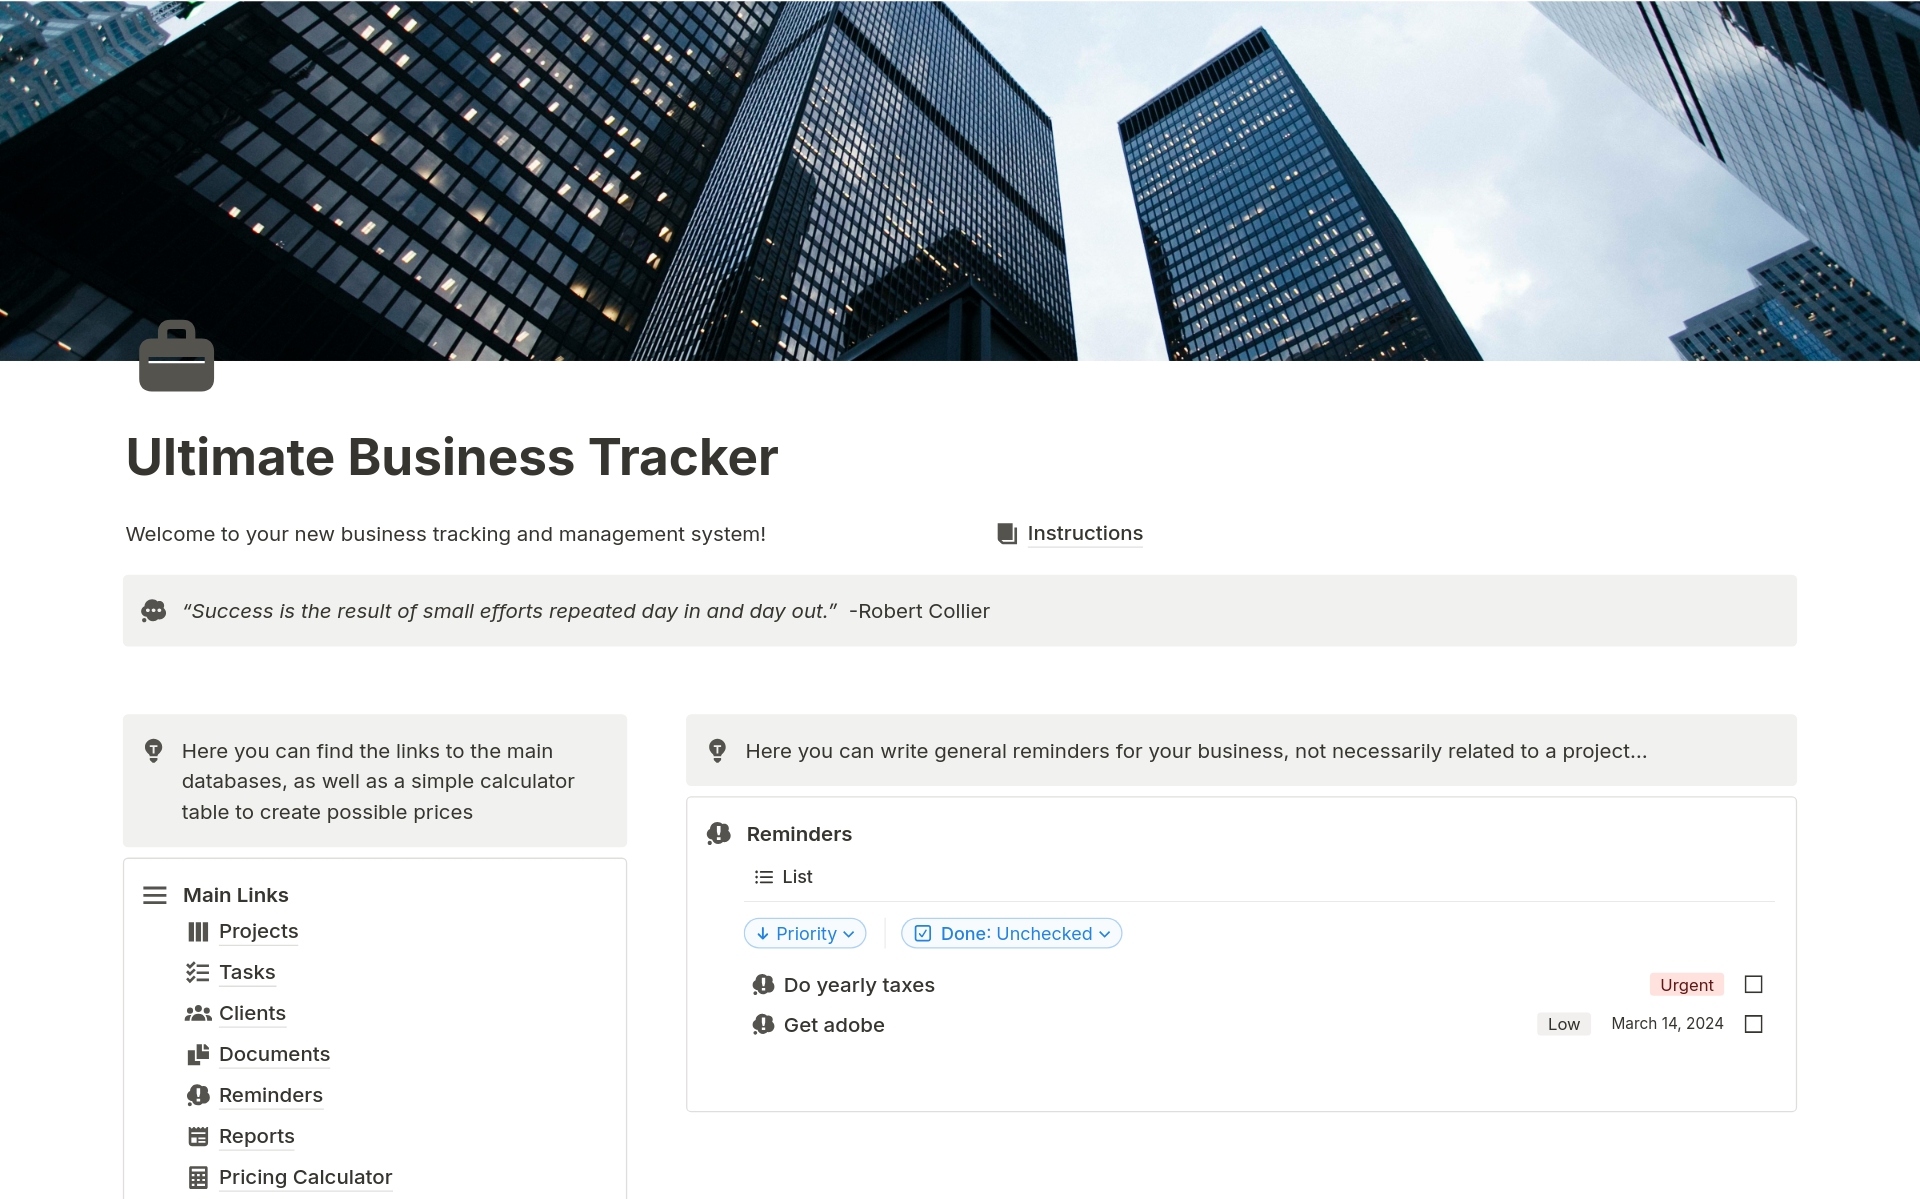 A simple yet complete template for organizing all different aspects of your business, such as tracking clients, projects, tasks, finances, and documents while accessing insightful income and expense reports.